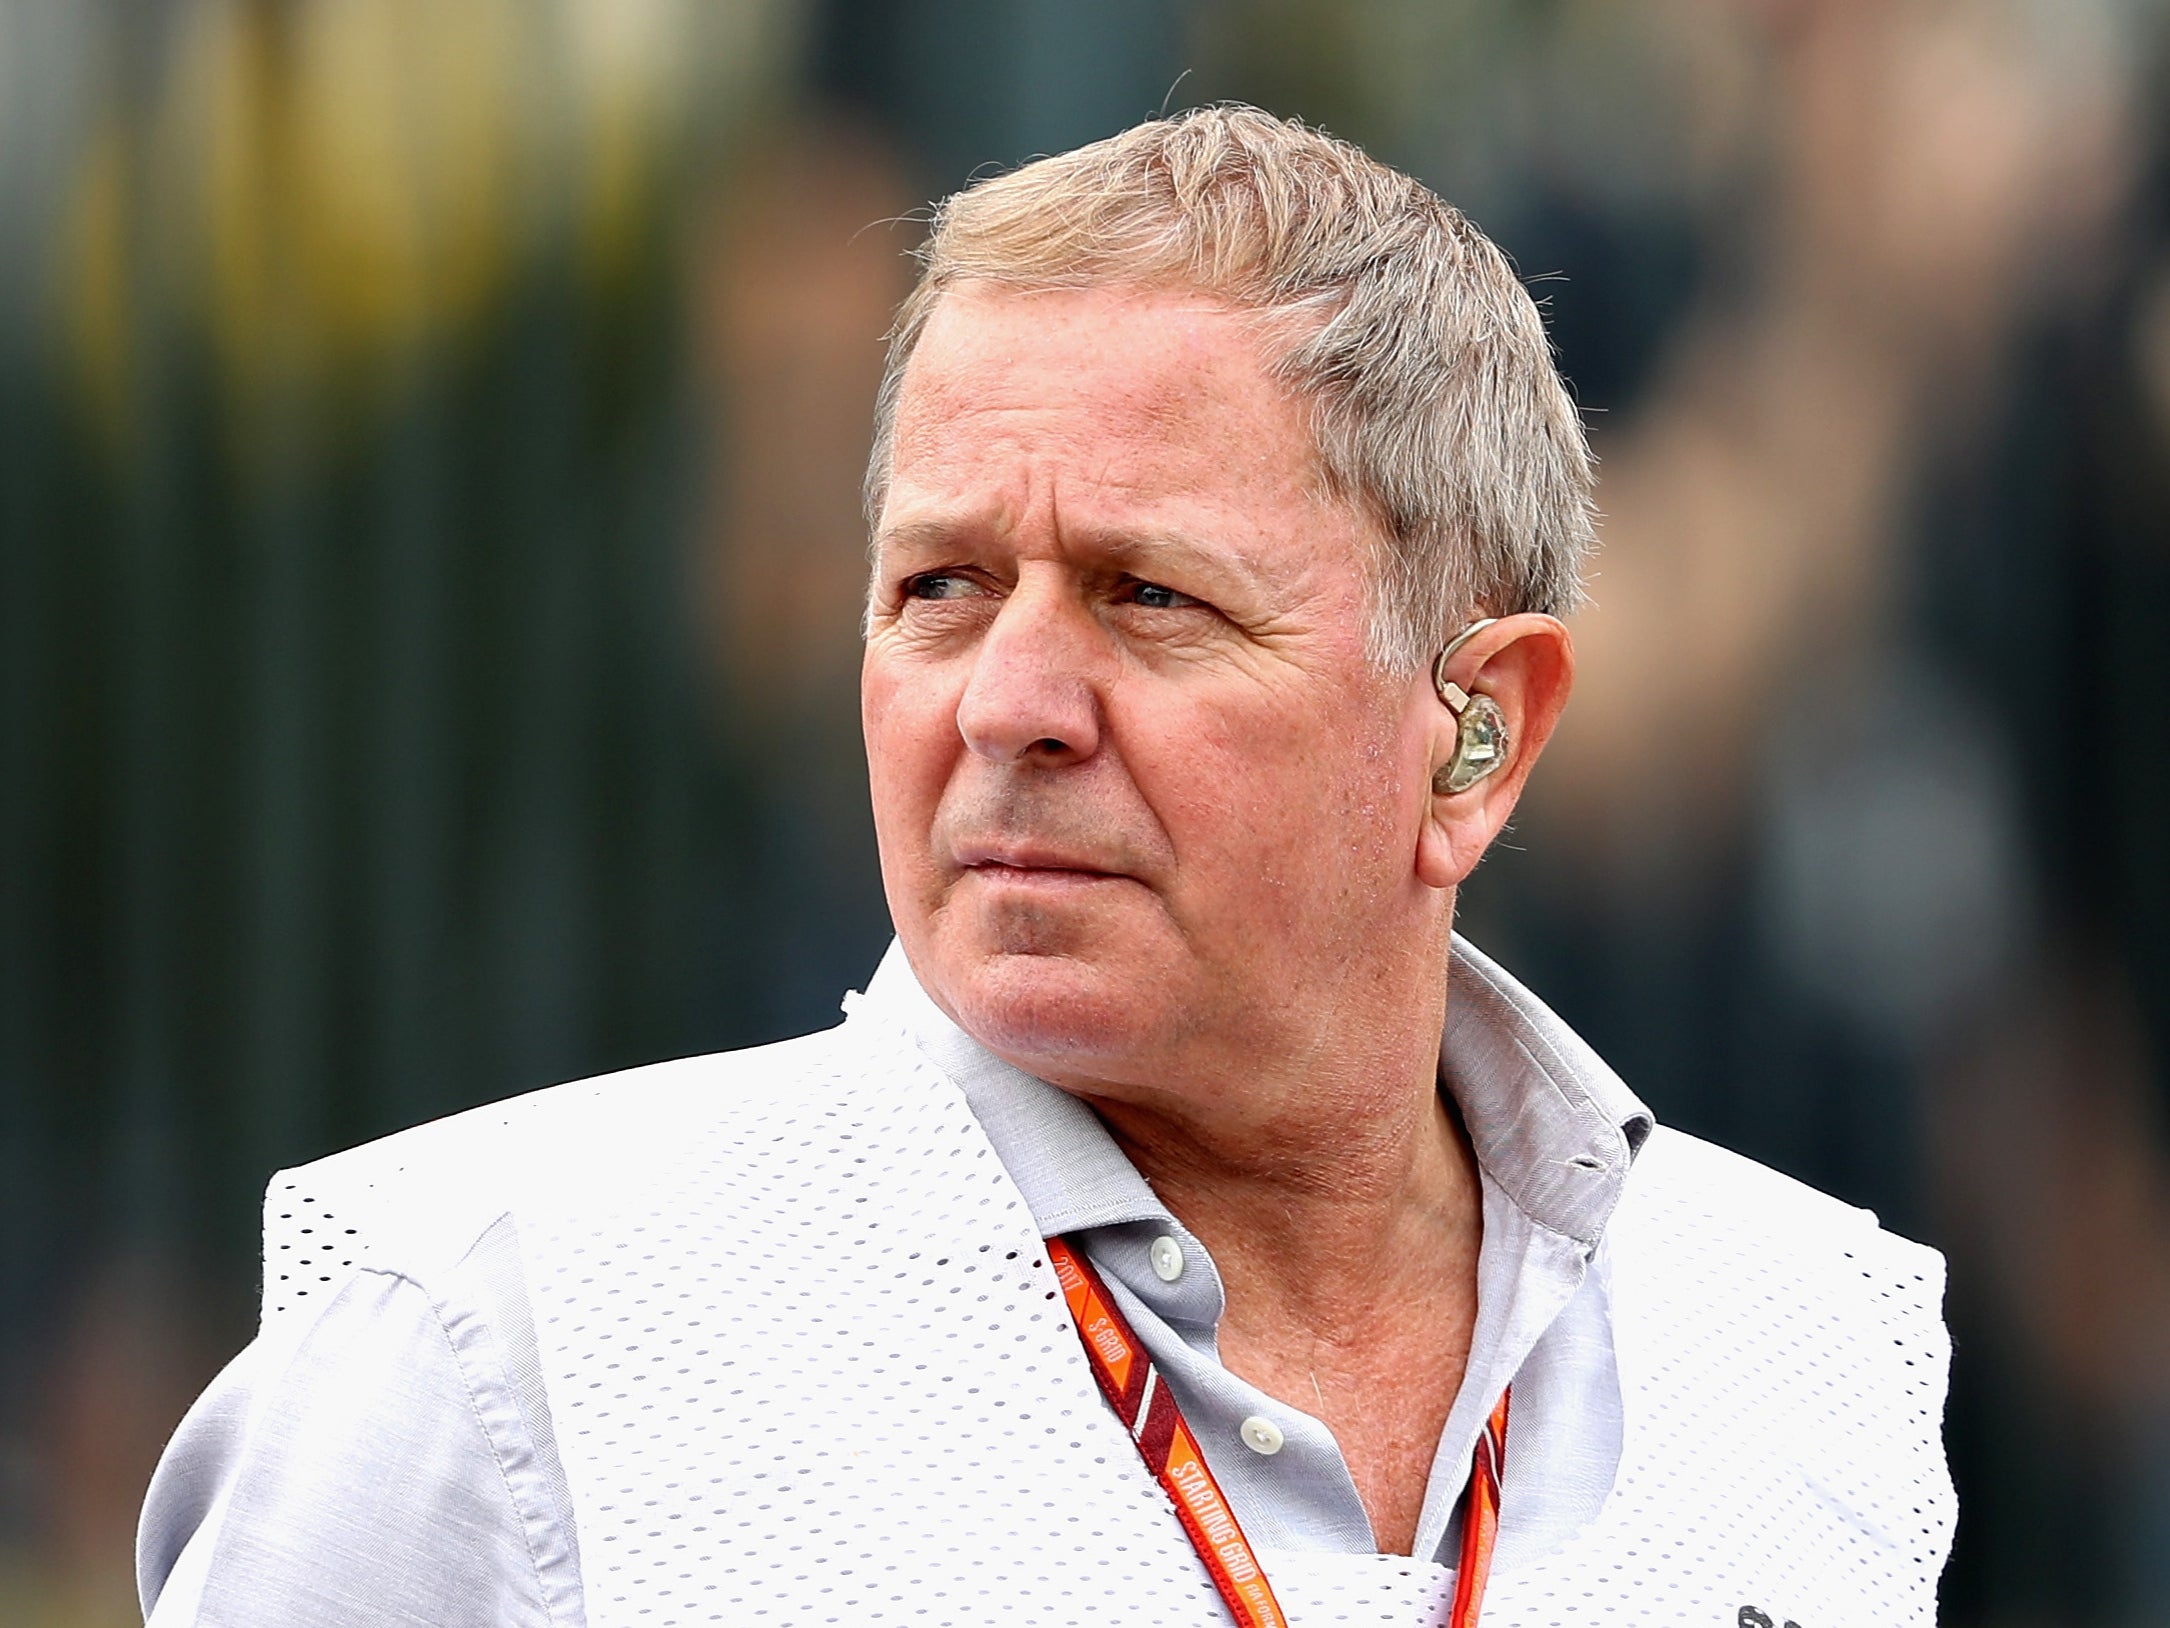 Martin Brundle has backed colleague Ted Kravitz after Red Bull boycotted Sky Sports during the Mexican Grand Prix